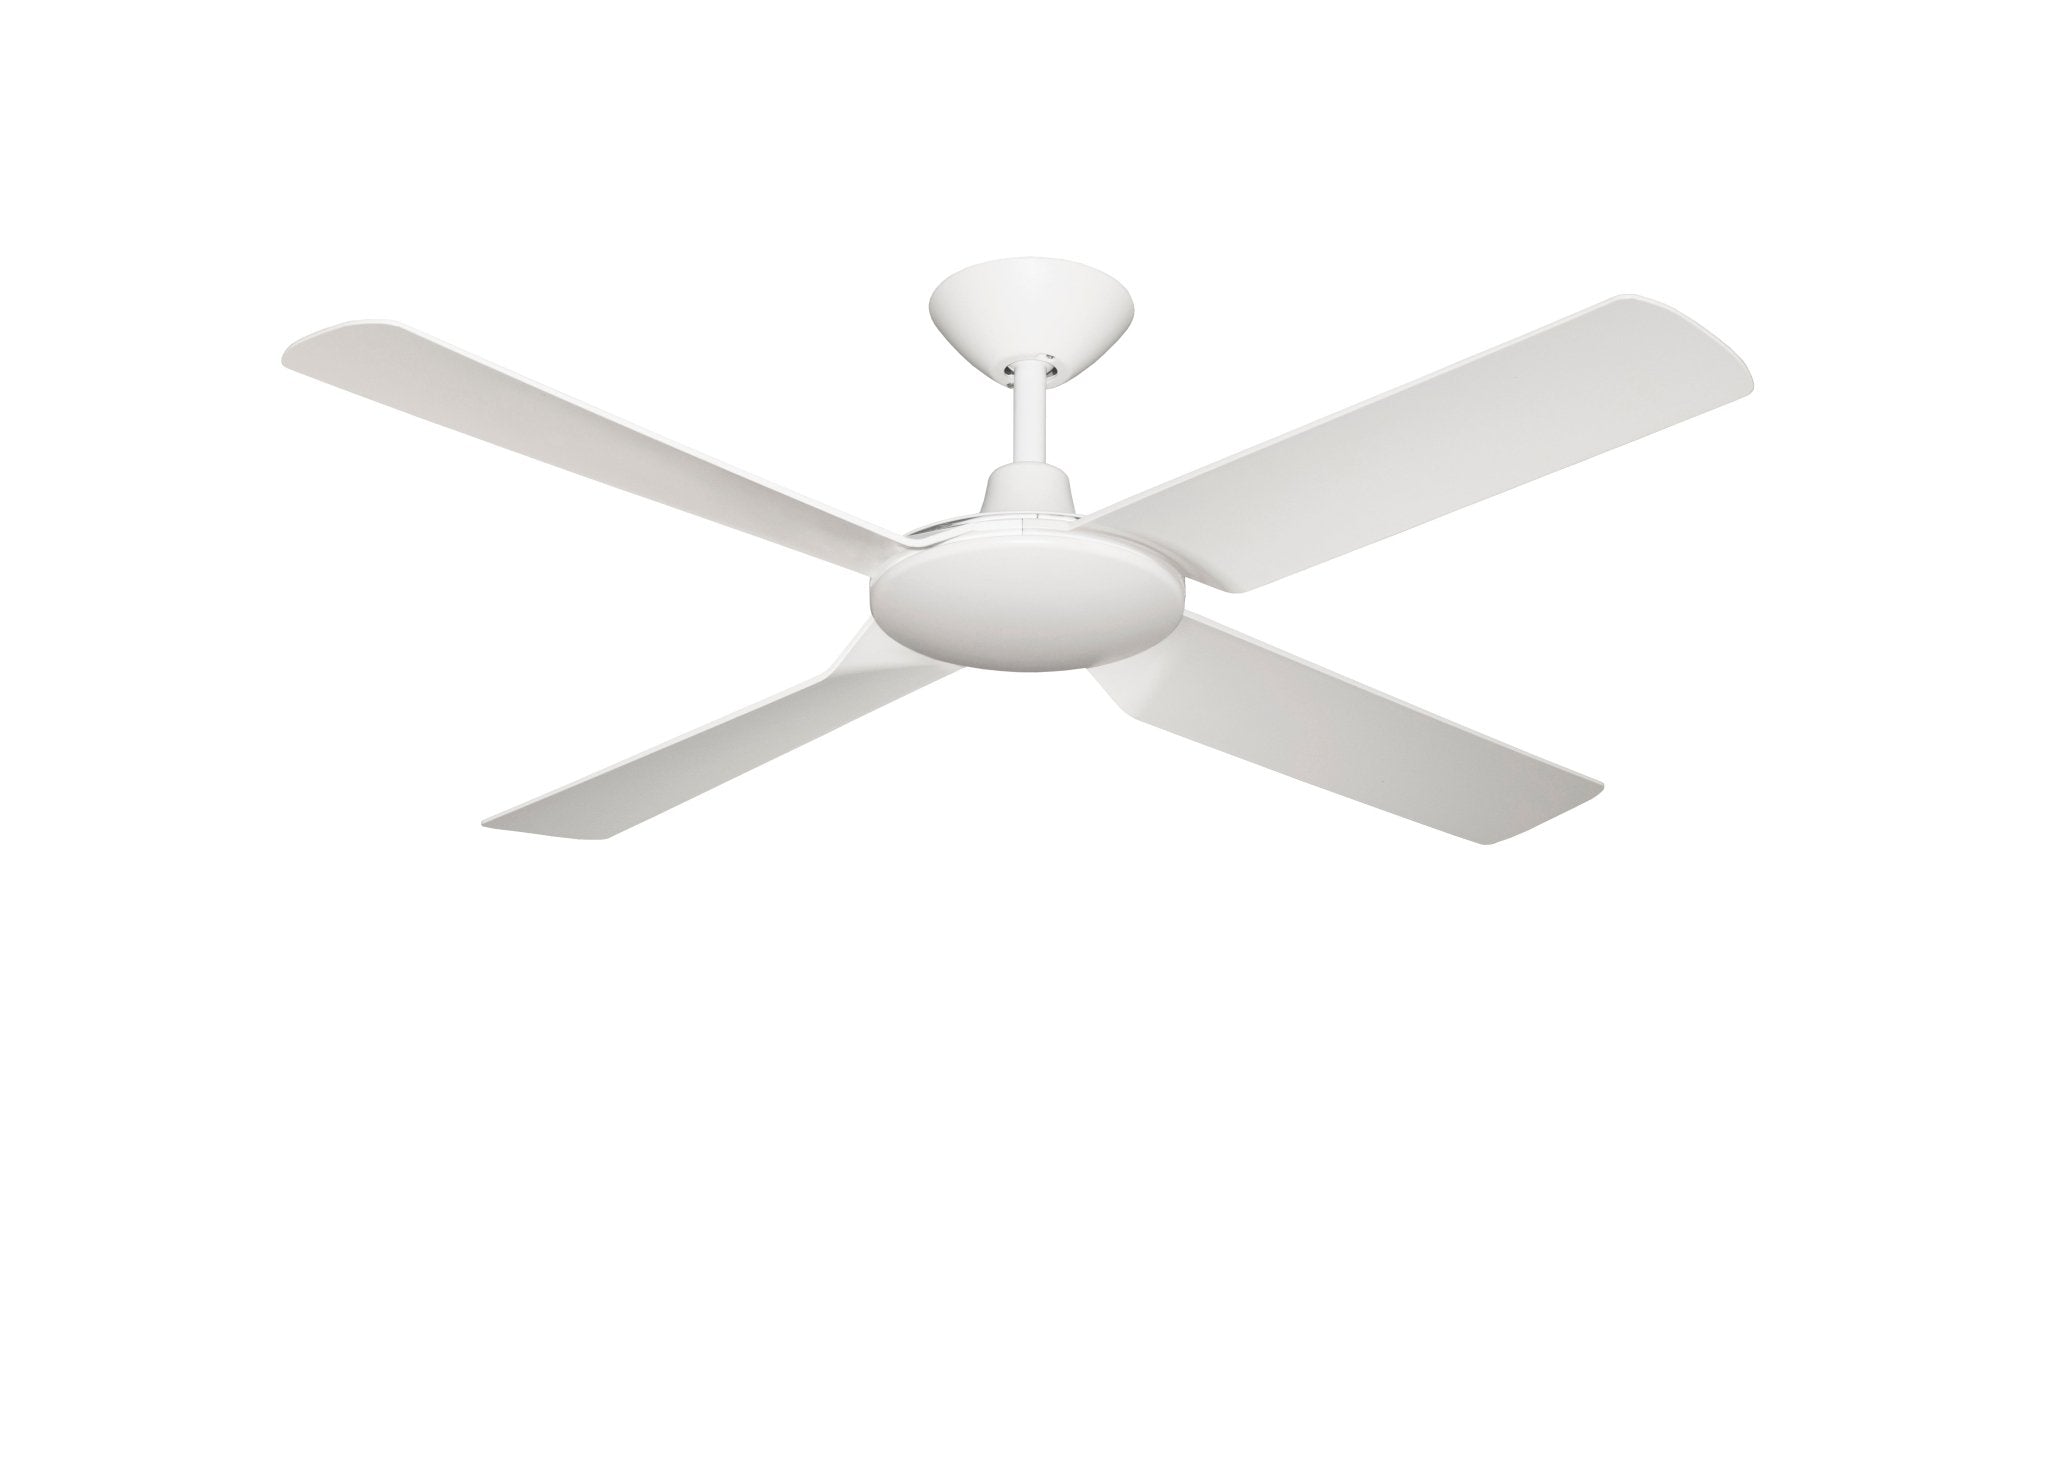 Next Creation V2 DC Ceiling Fan by Hunter Pacific in White 52″ - Mases LightingHunter Pacific